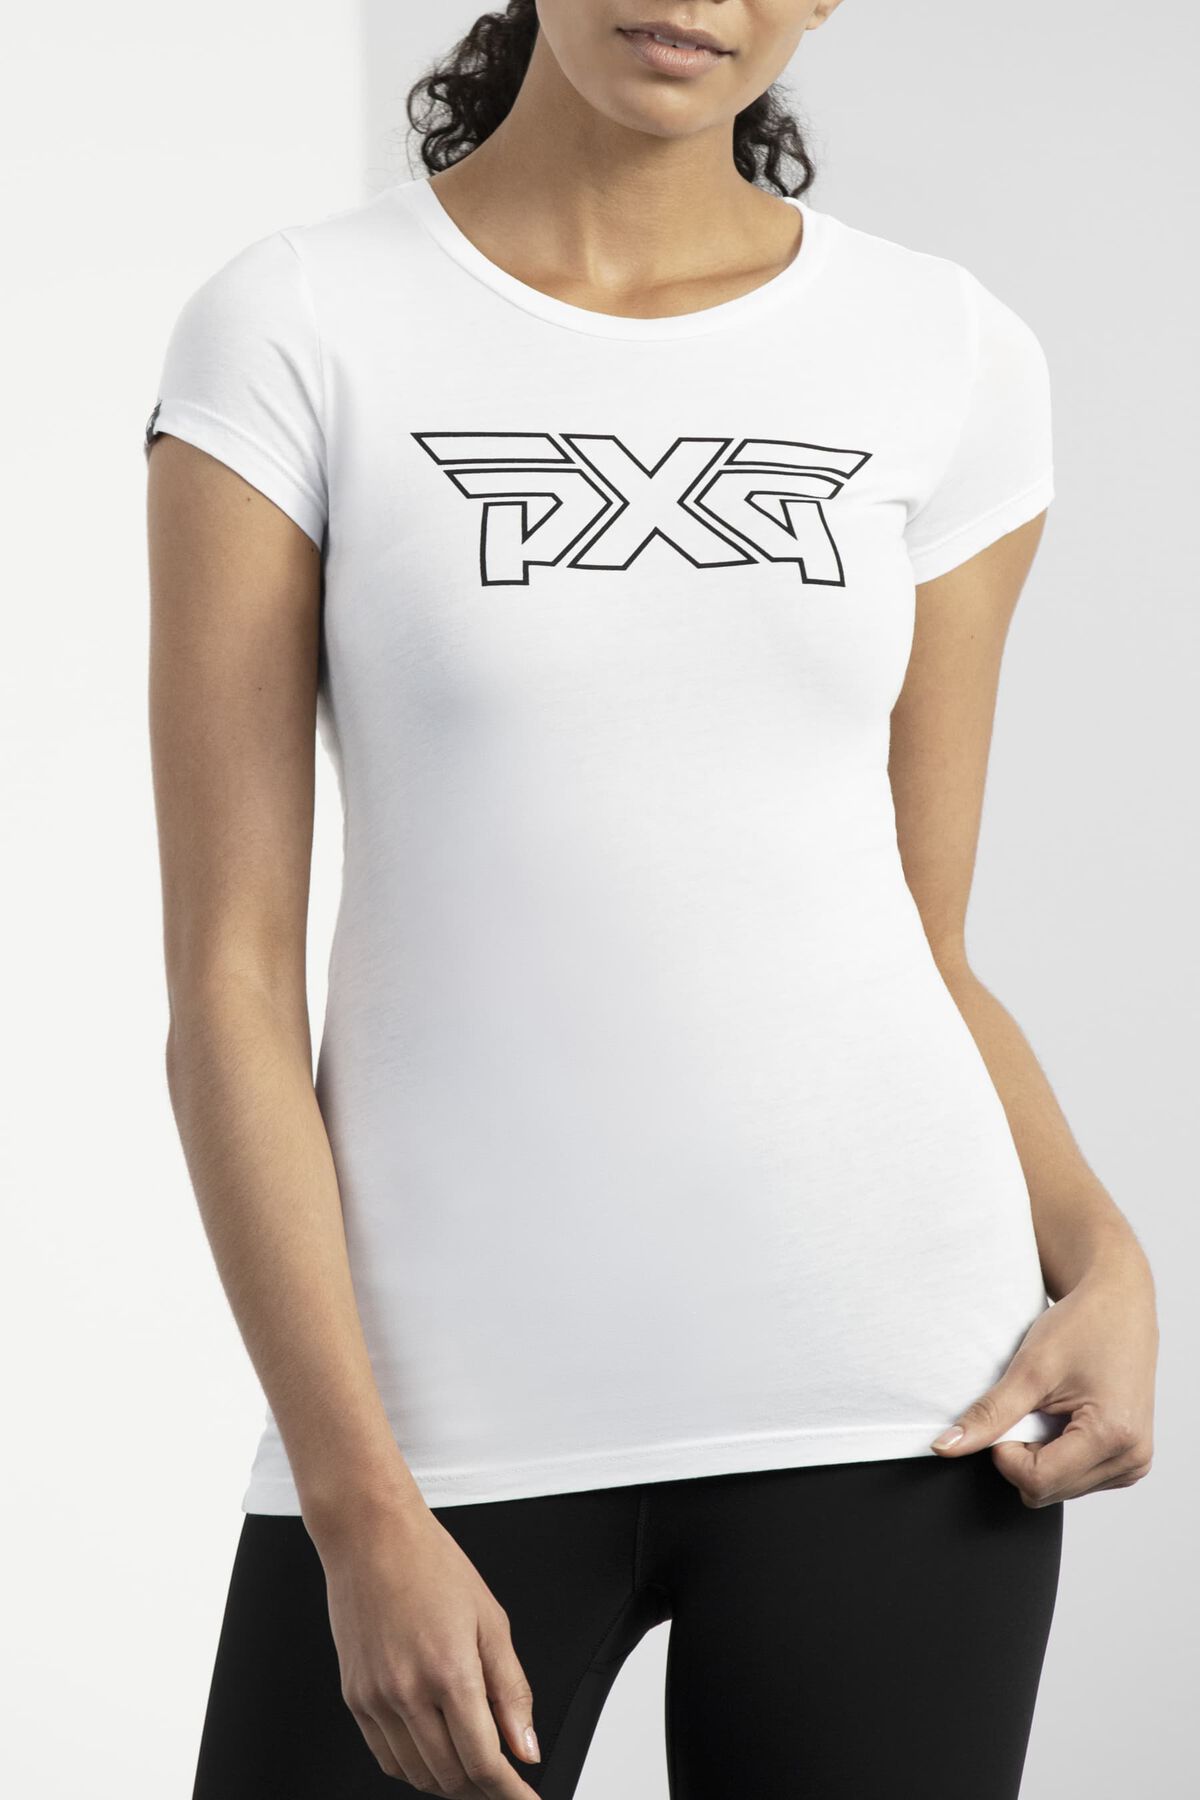 PXG Outline Tee 